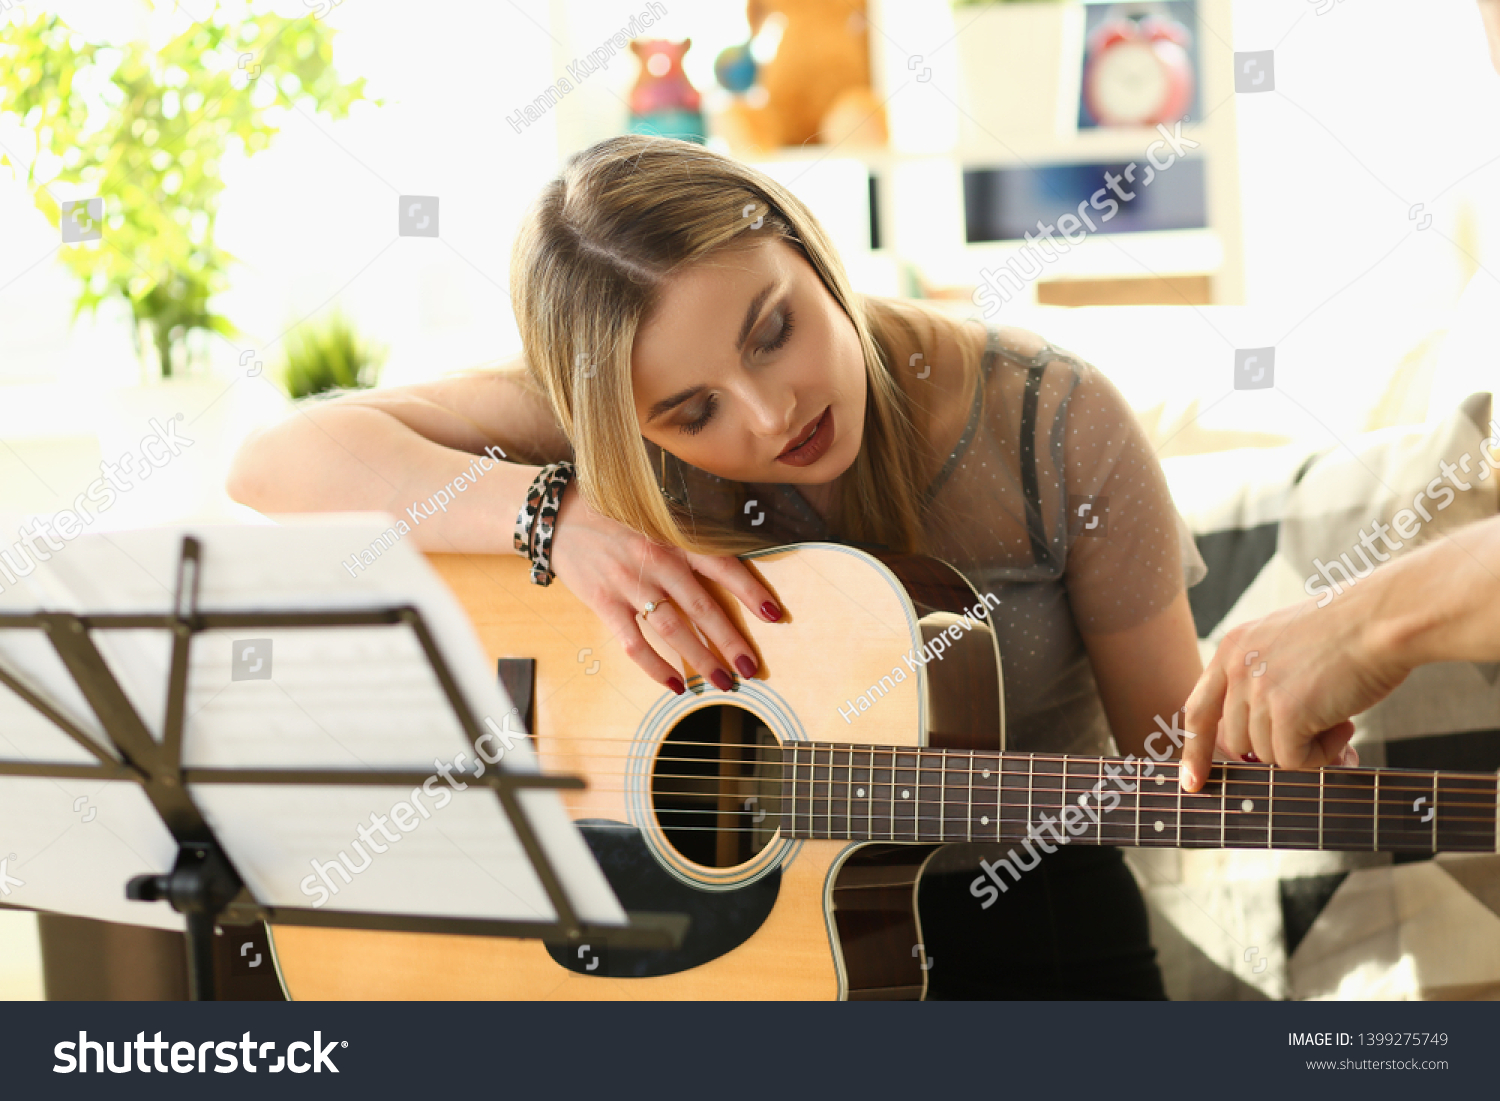 Guitar Playing Lesson Music Education Concept. Woman Practice while Sitting on Sofa. Man Hand Touching Strings Showing Chords. Beautiful Blonde Listening Carefully. Inspiration for Musical Performance #1399275749